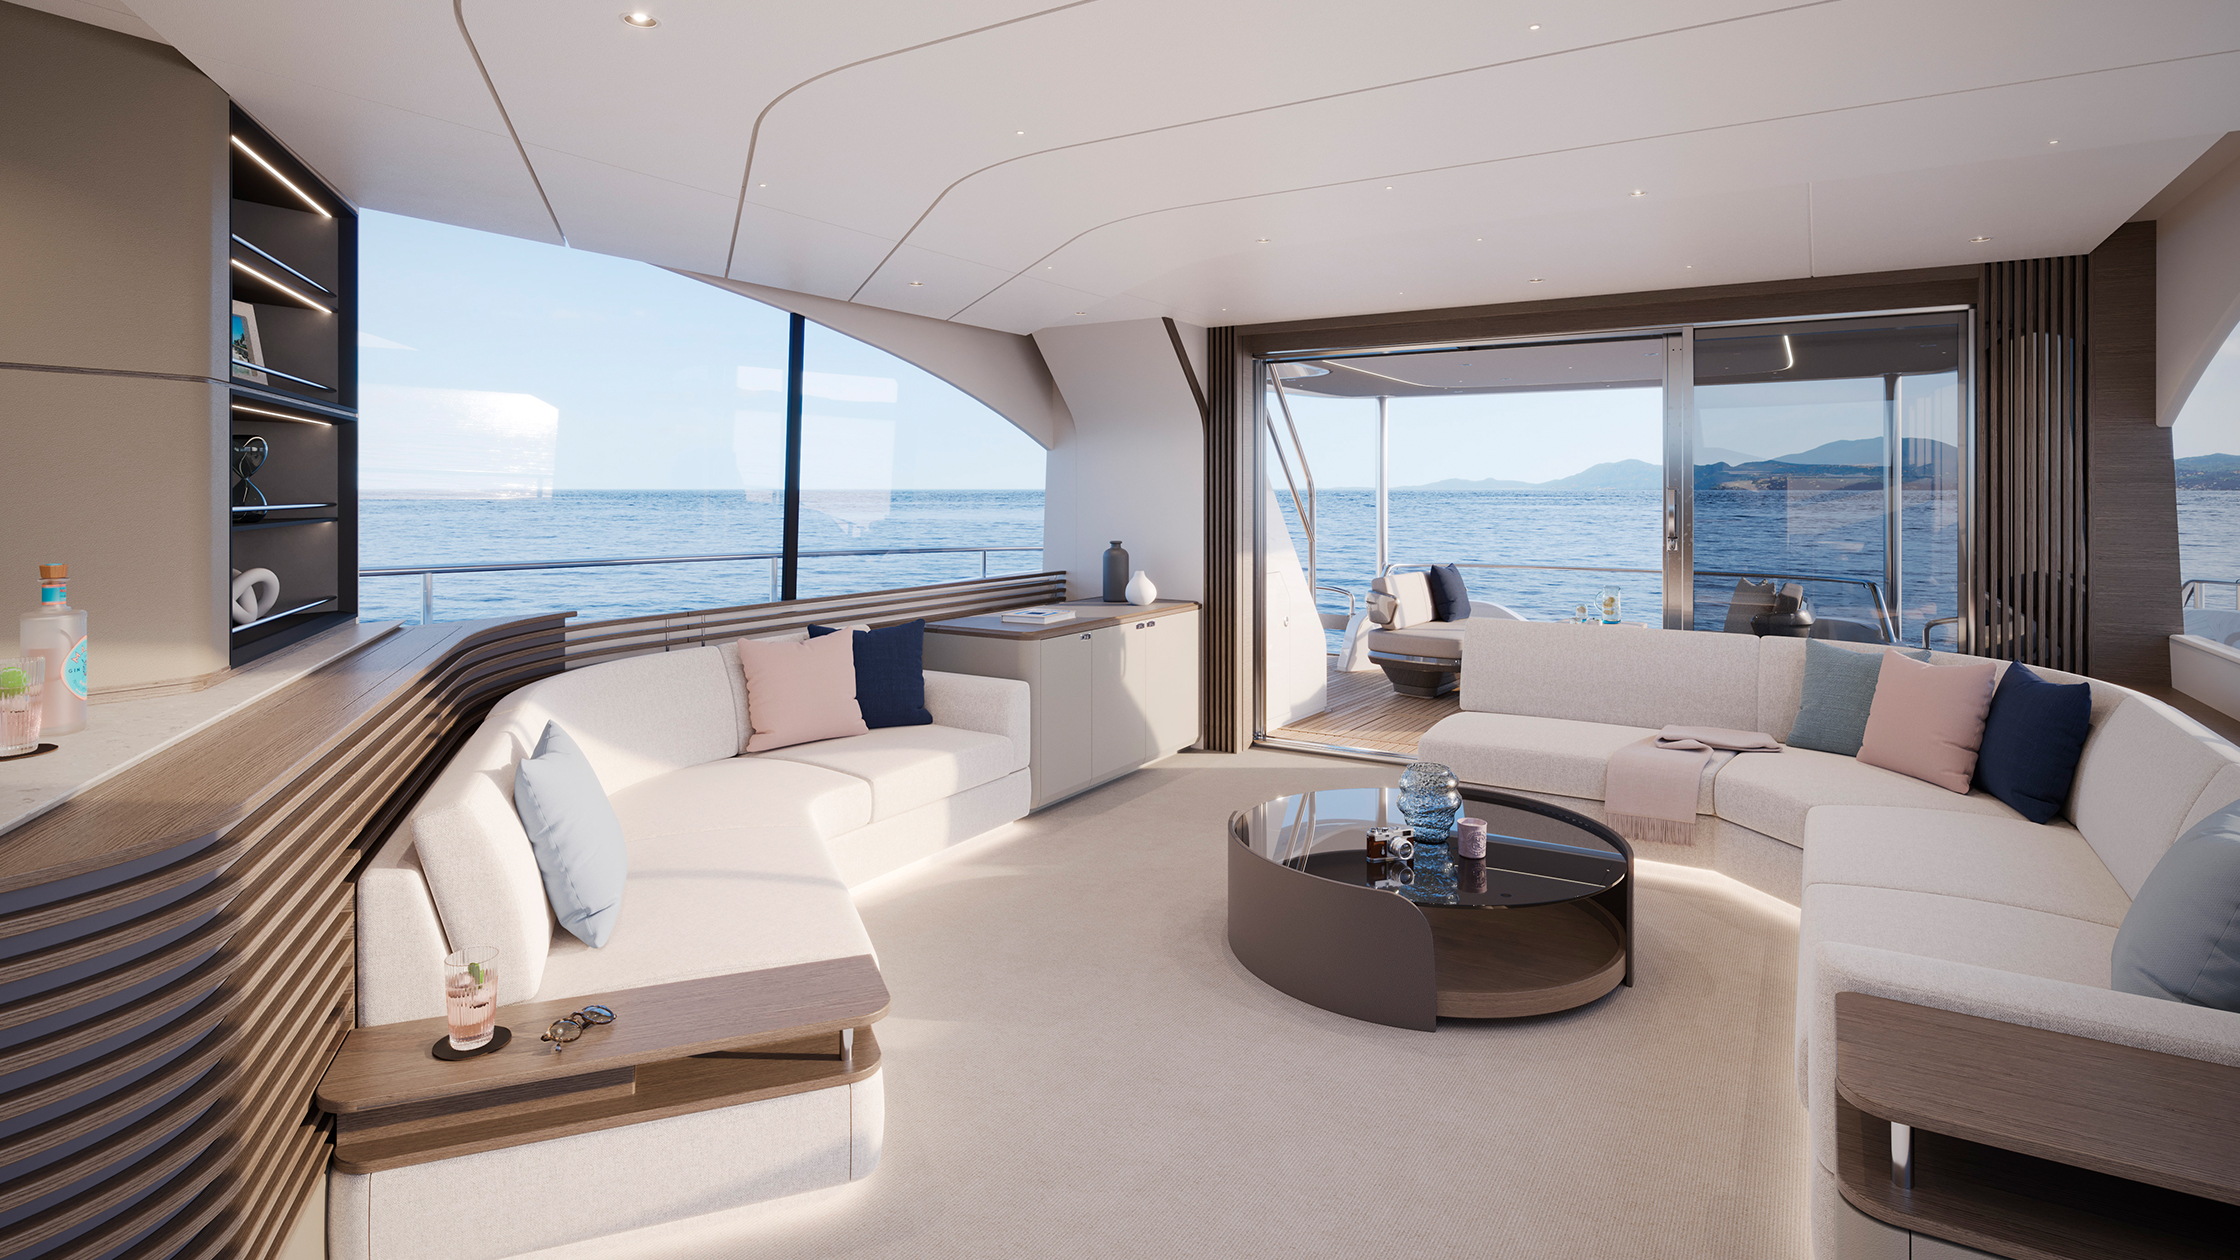 British luxury yacht-builder Princess sets sail to find new owners, Business News